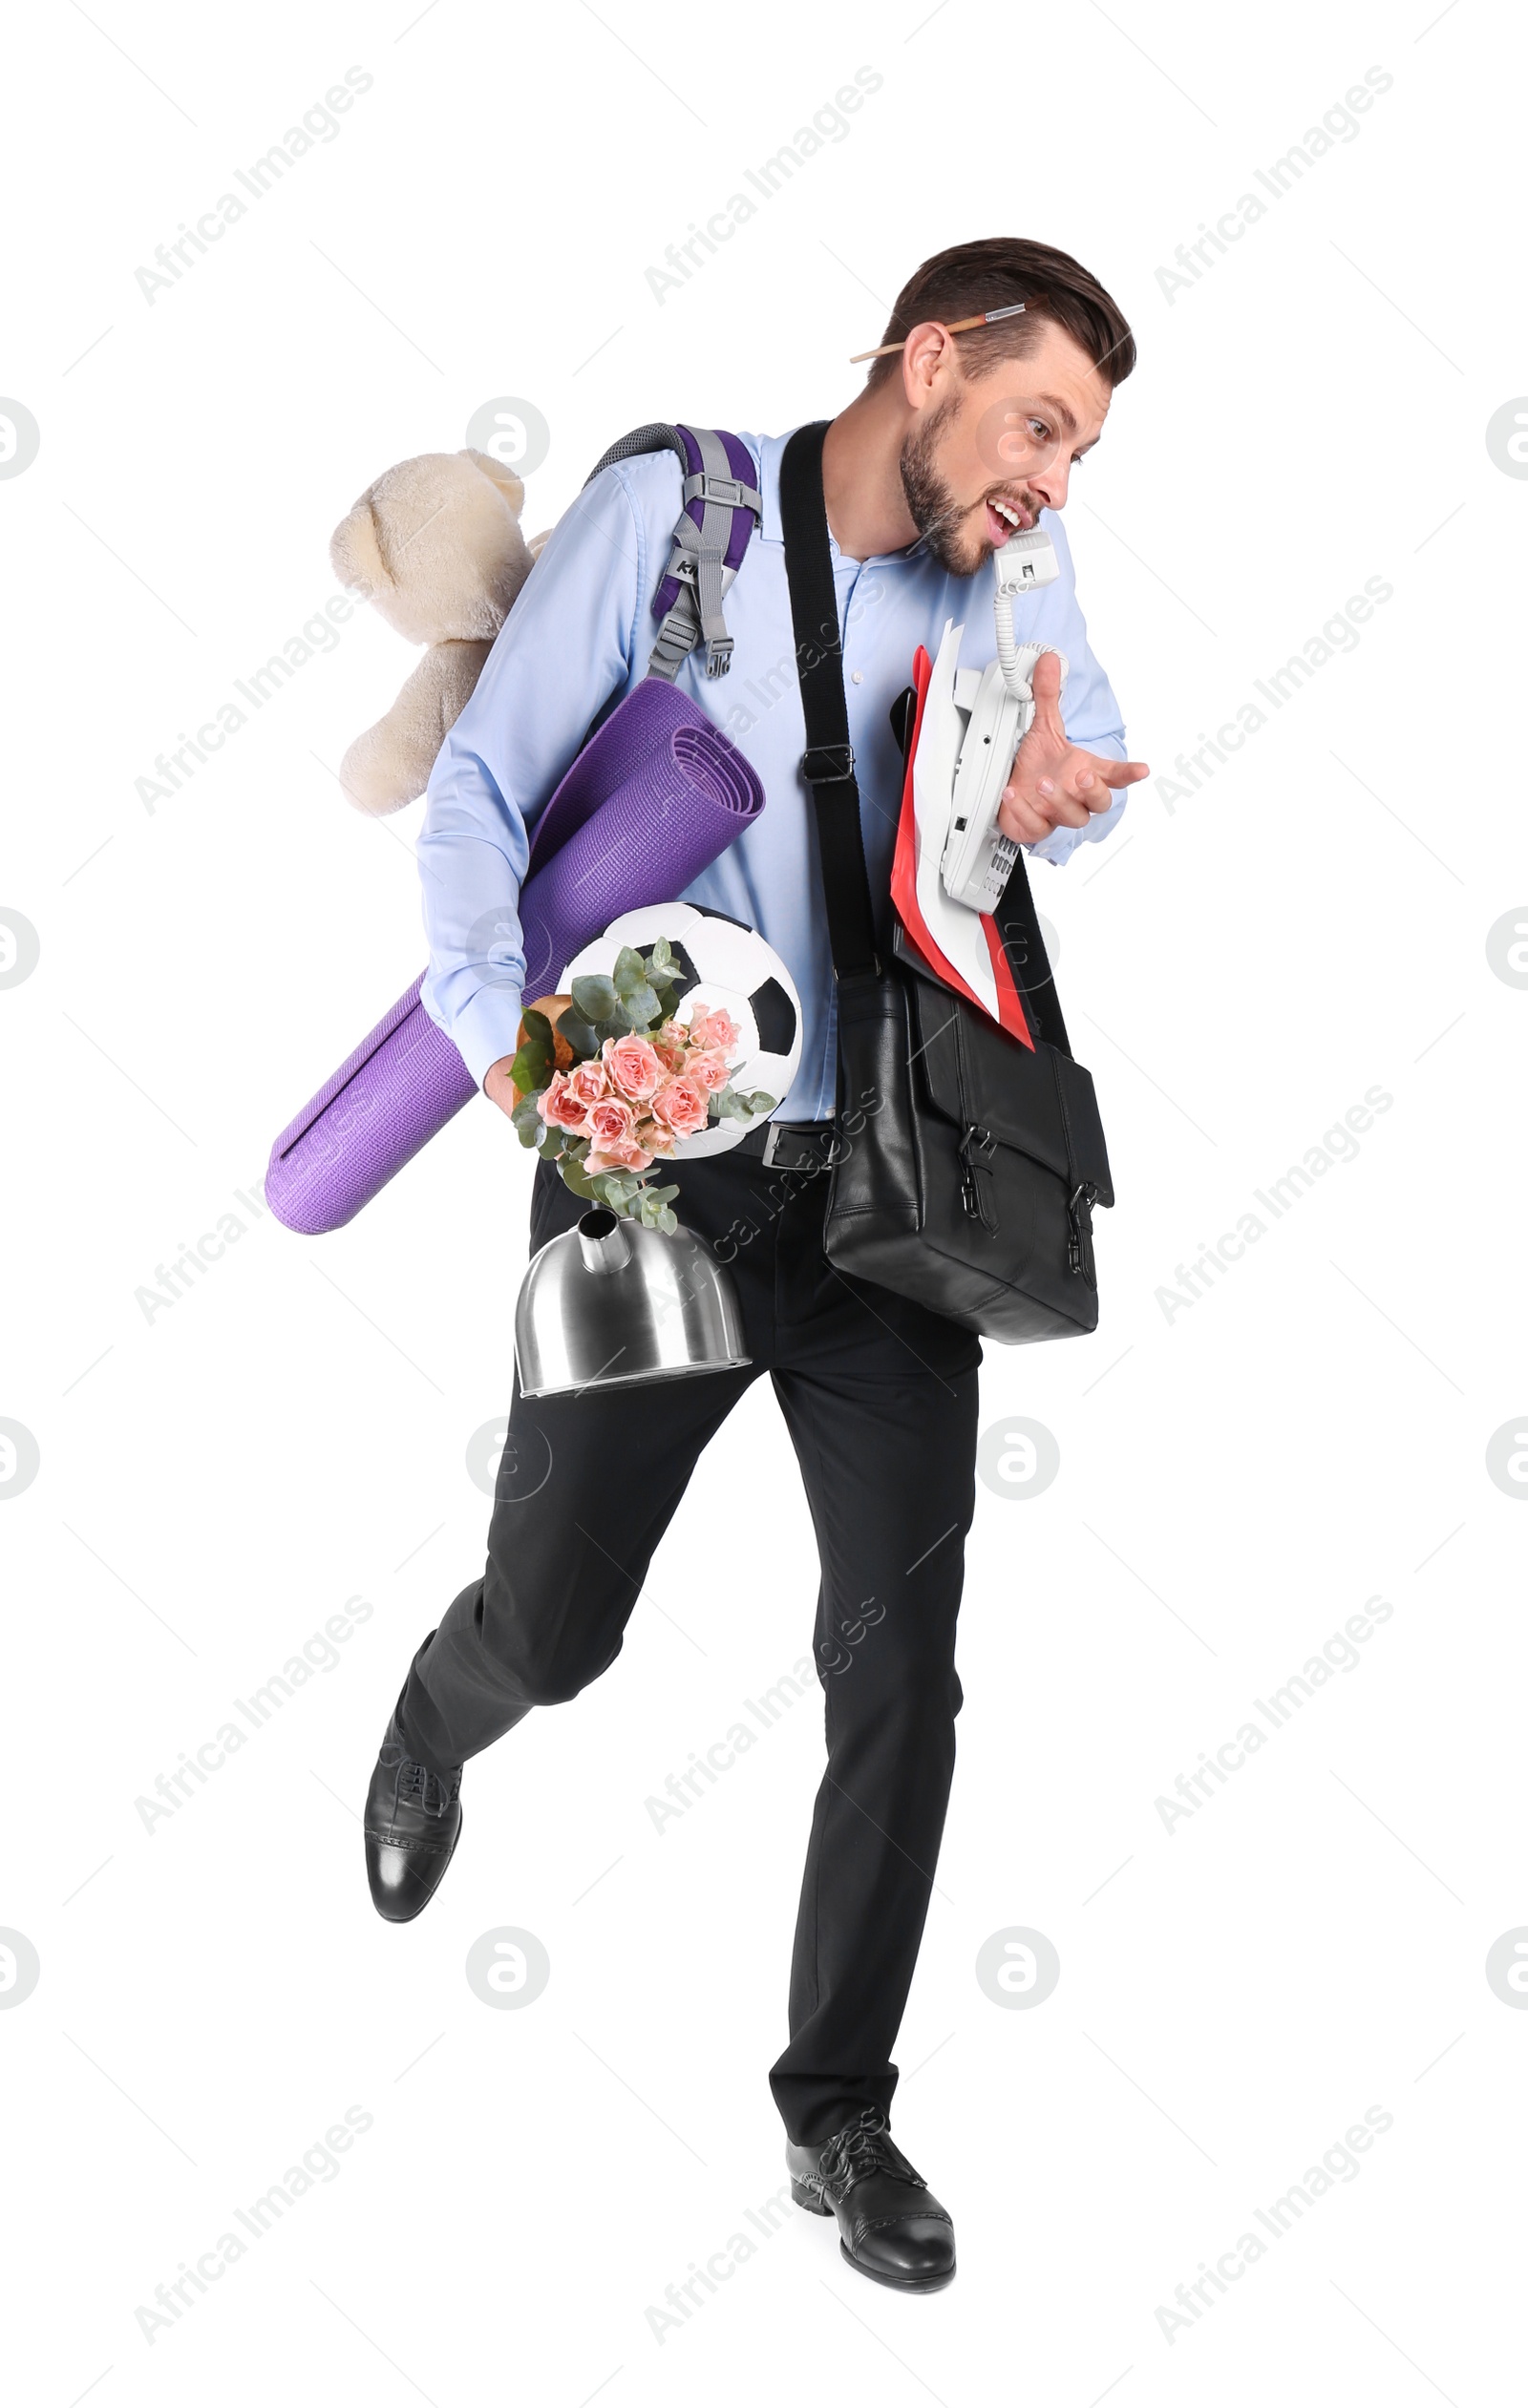 Photo of Businessman with lots of things running while talking on phone against white background. Combining life and work